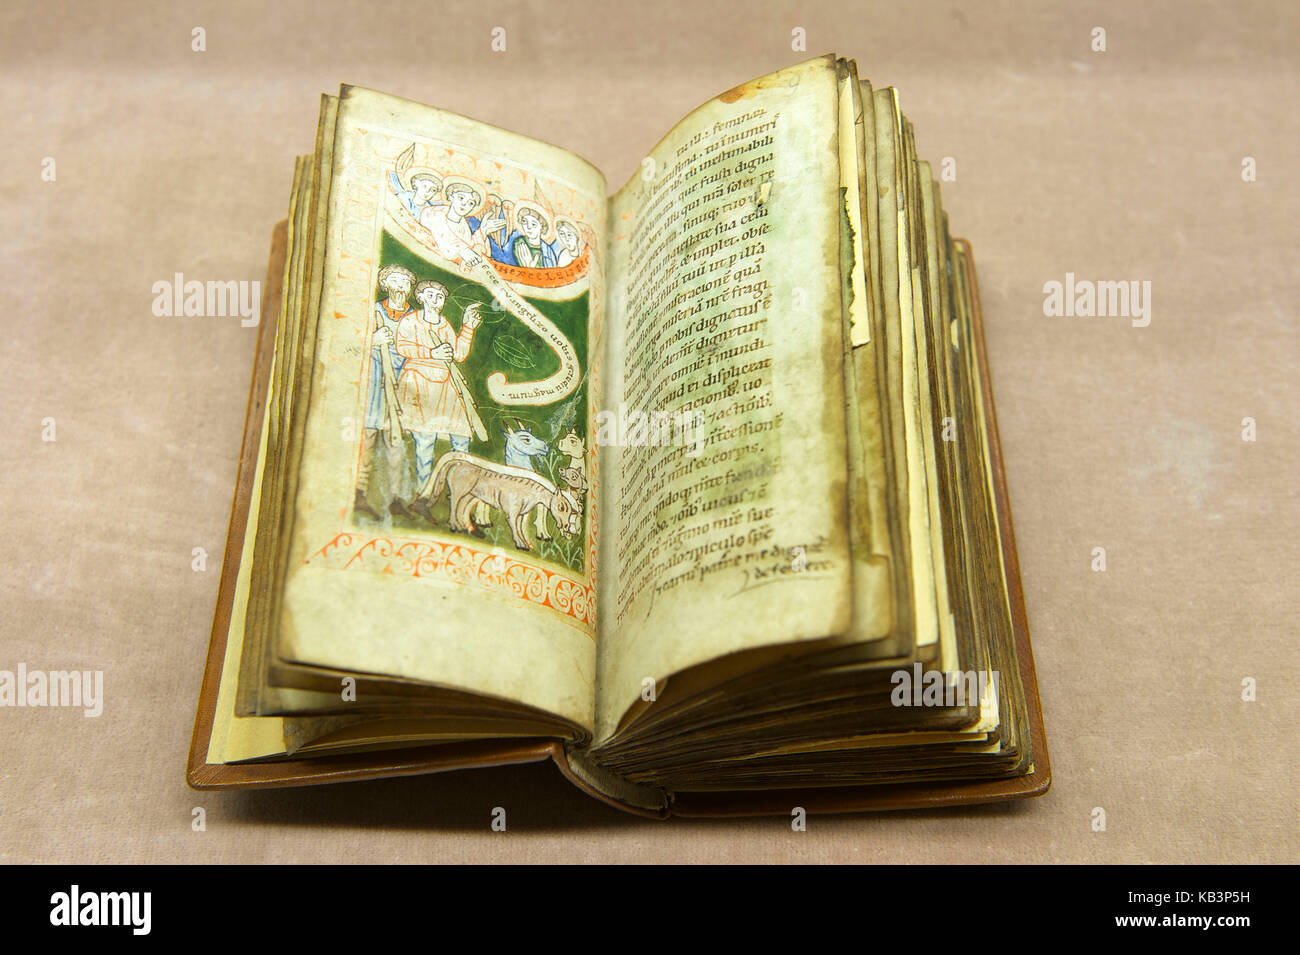 France, Bas Rhin, Selestat, humanistic library, Liber Precum from the 12th centtury, manuscript on parchment containing different prayers Stock Photo